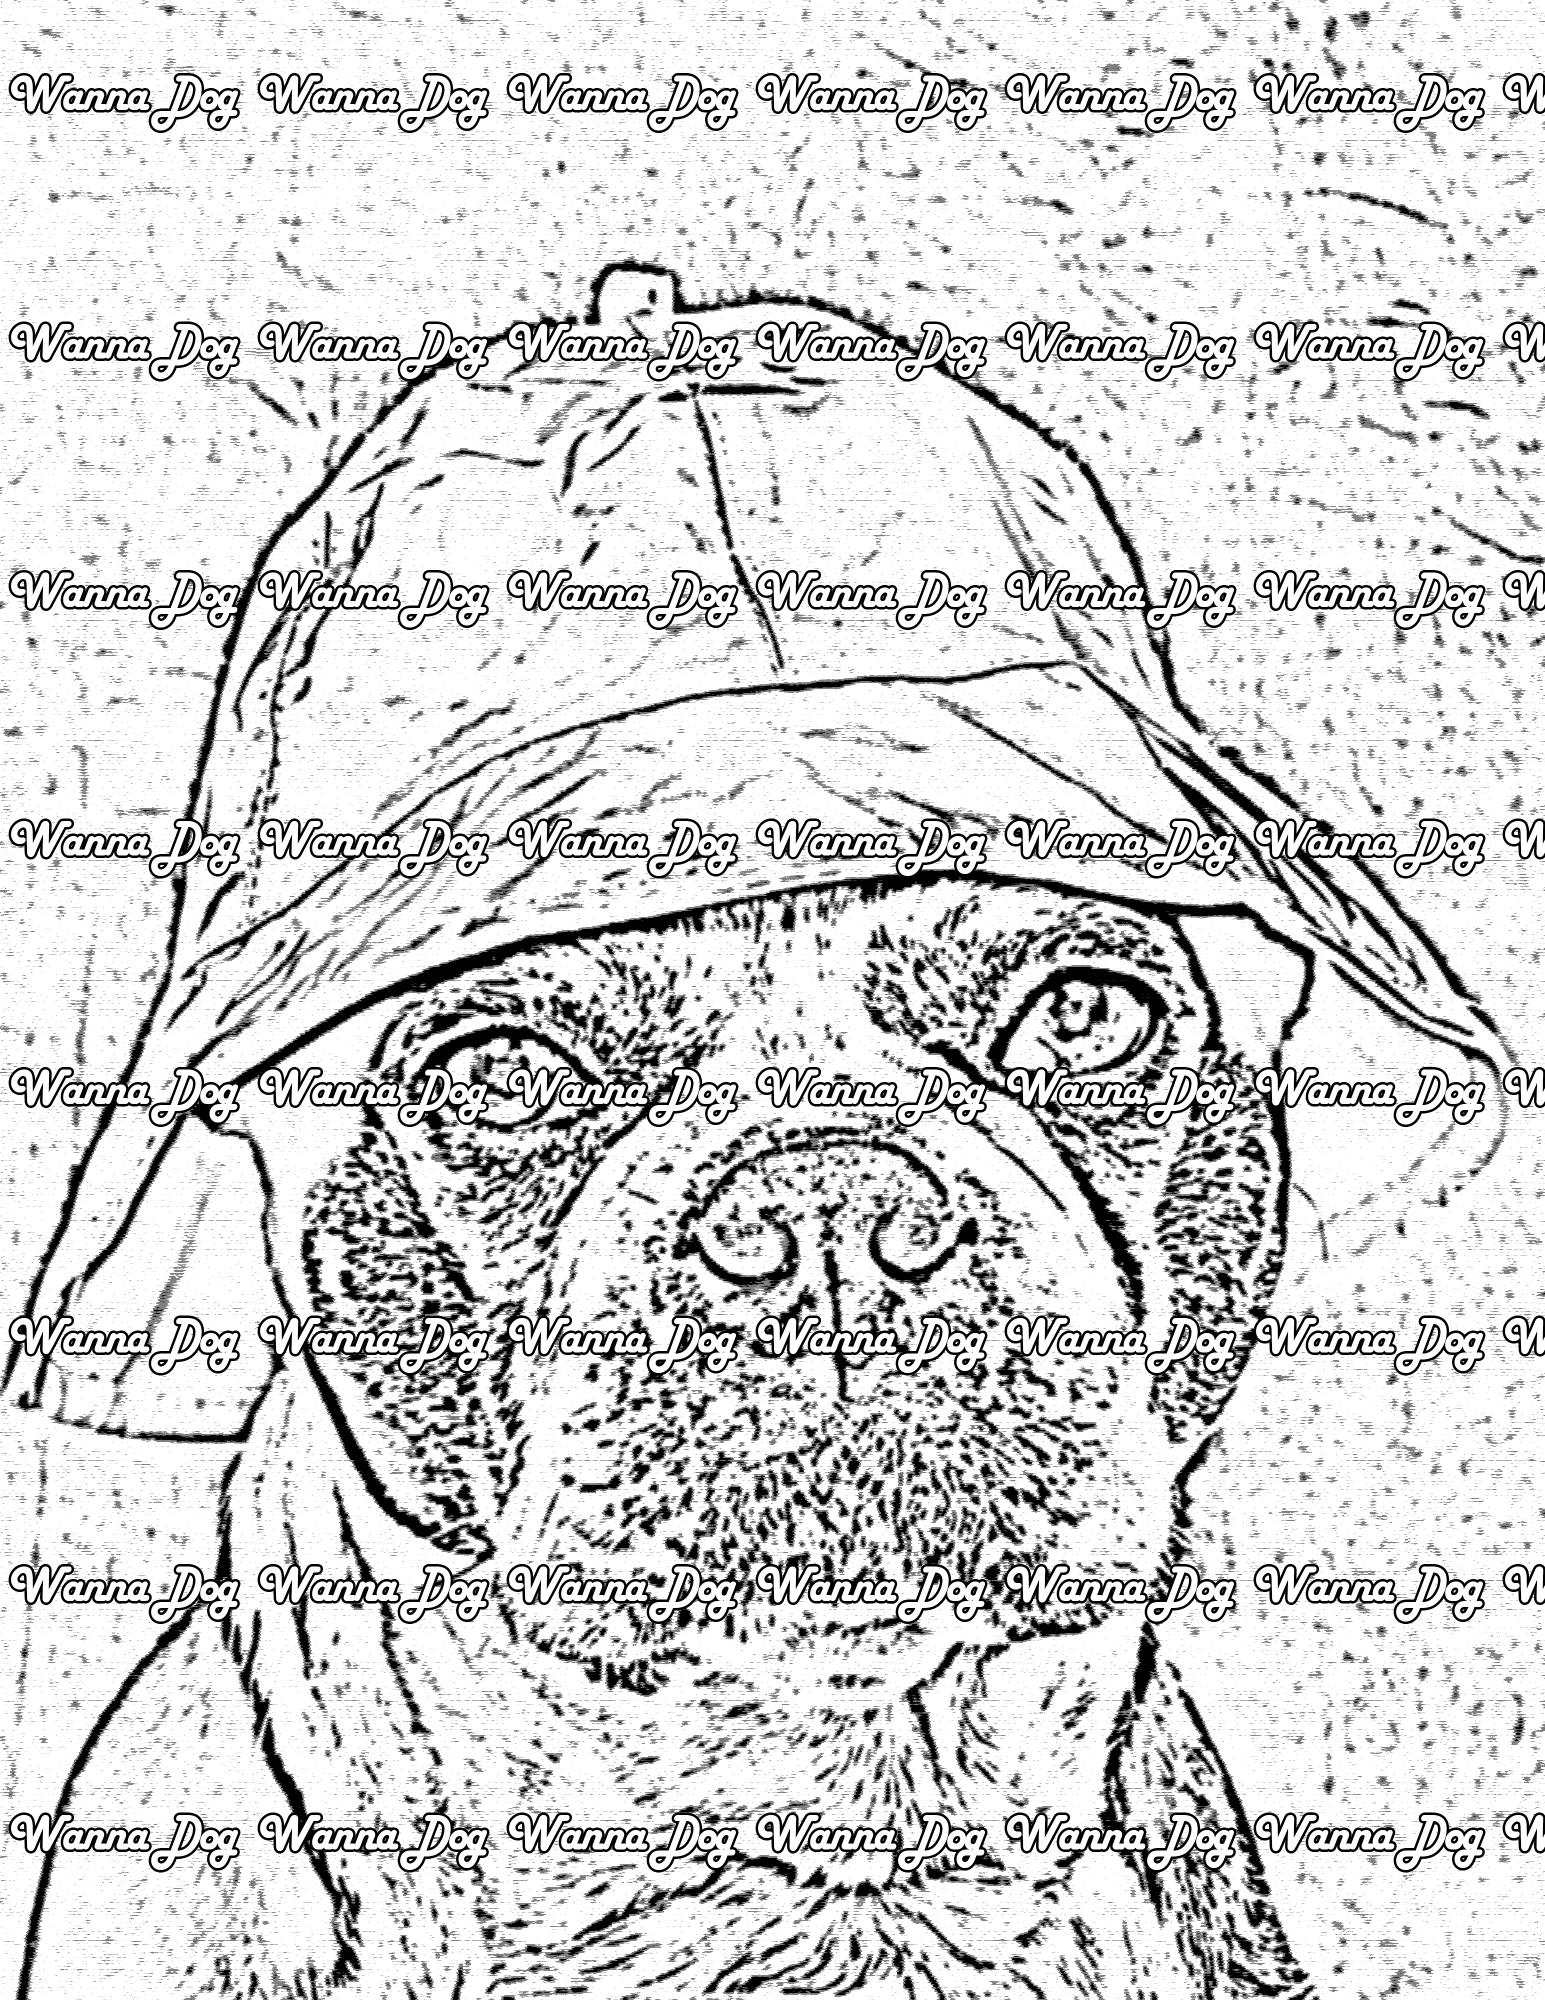 Boston Terrier Coloring Page of a Boston Terrier in a hat